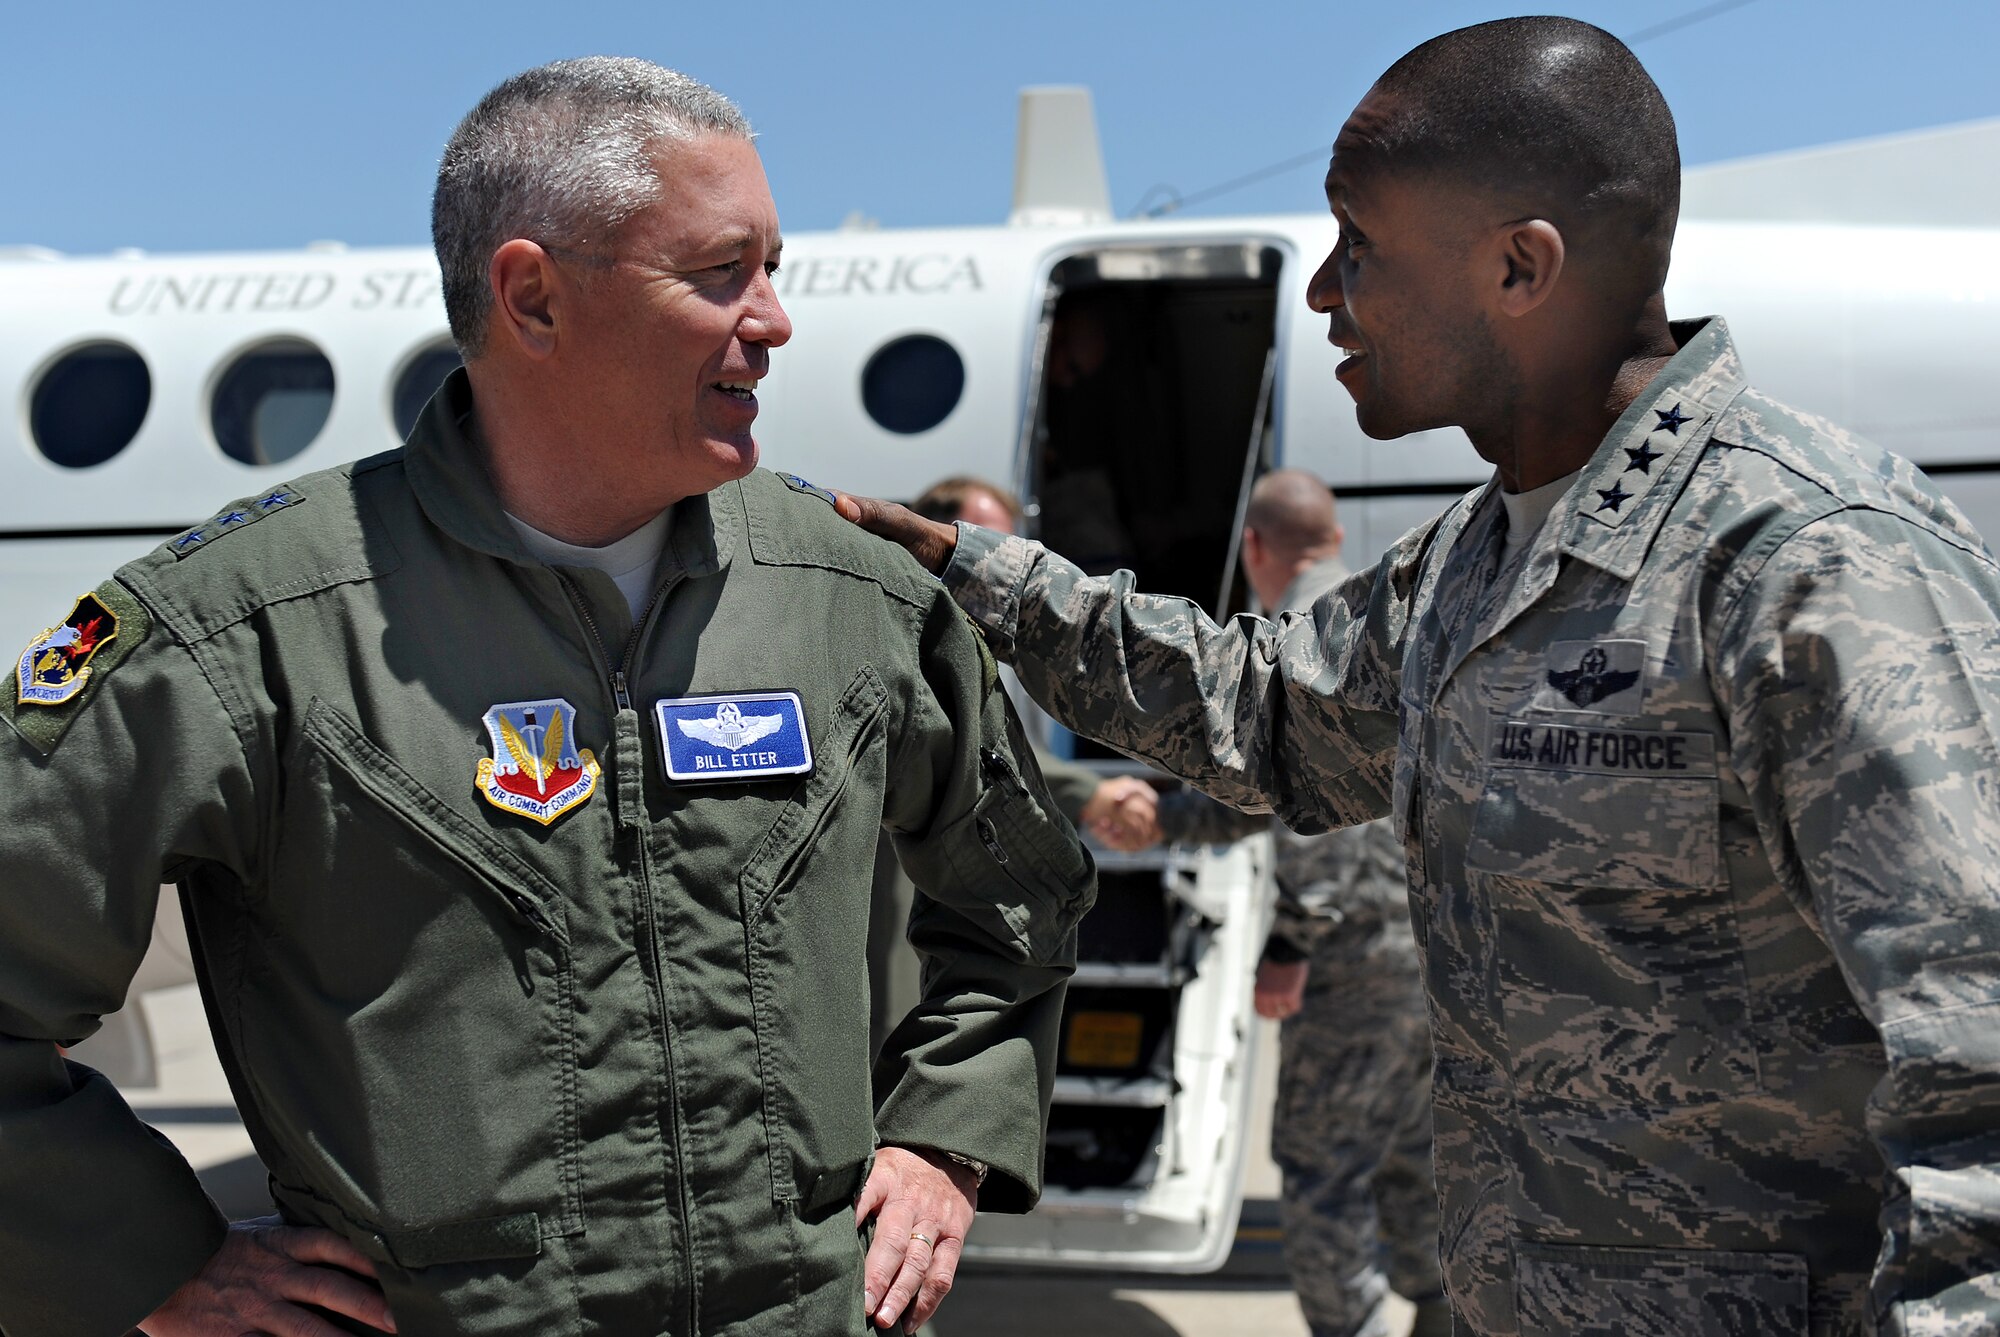 130513-F-OH119-076.jpg
SCOTT AFB, Ill. - Lt. Gen. Darren W. McDew, Commander, 18th Air Force,
right, greets, Lt. Gen. William H. Etter, Commander, Continental U.S. North
American Aerospace Defense Command Region - 1st Air Force (Air Forces
Northern), here May 13. Gen. Etter met with Mobility Airmen and leaders
during his visit, expressing appreciation for their support of his command’s
role as the air component of U.S. Northern Command. (U.S. Air Force Photo by
Senior Airman Divine Cox)
